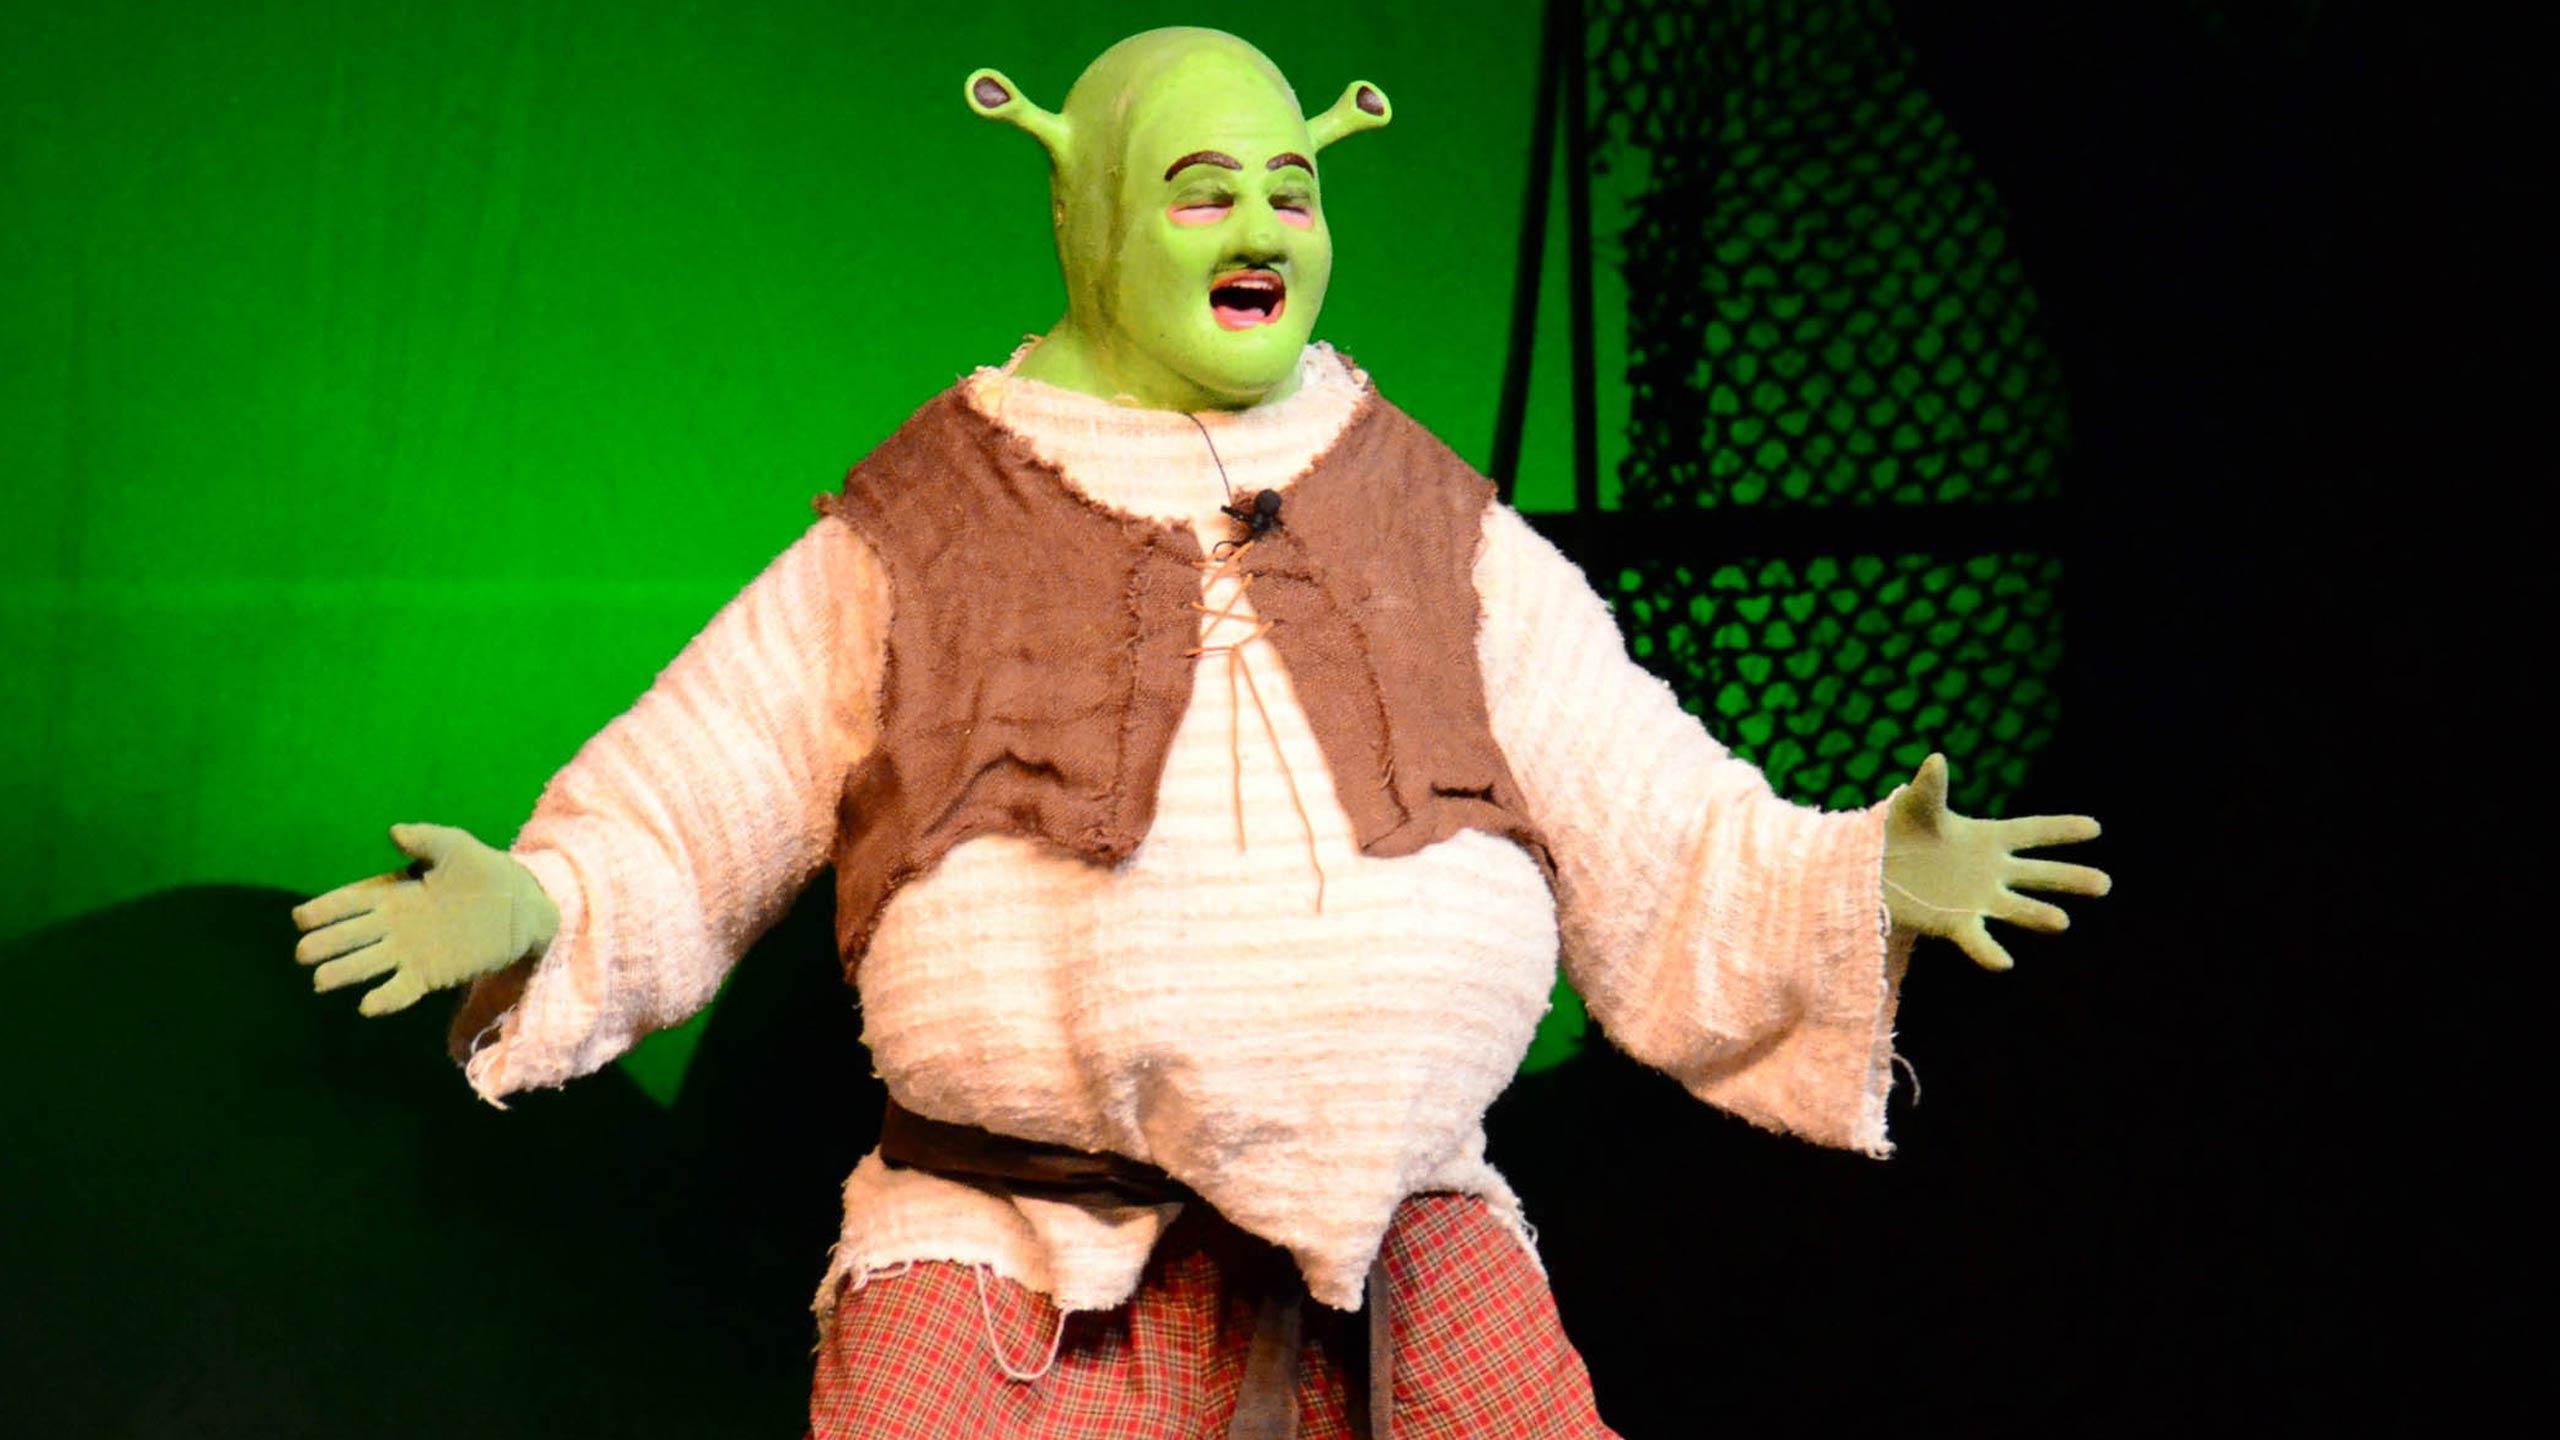 Real life actor impersonating the fictional character Shrek